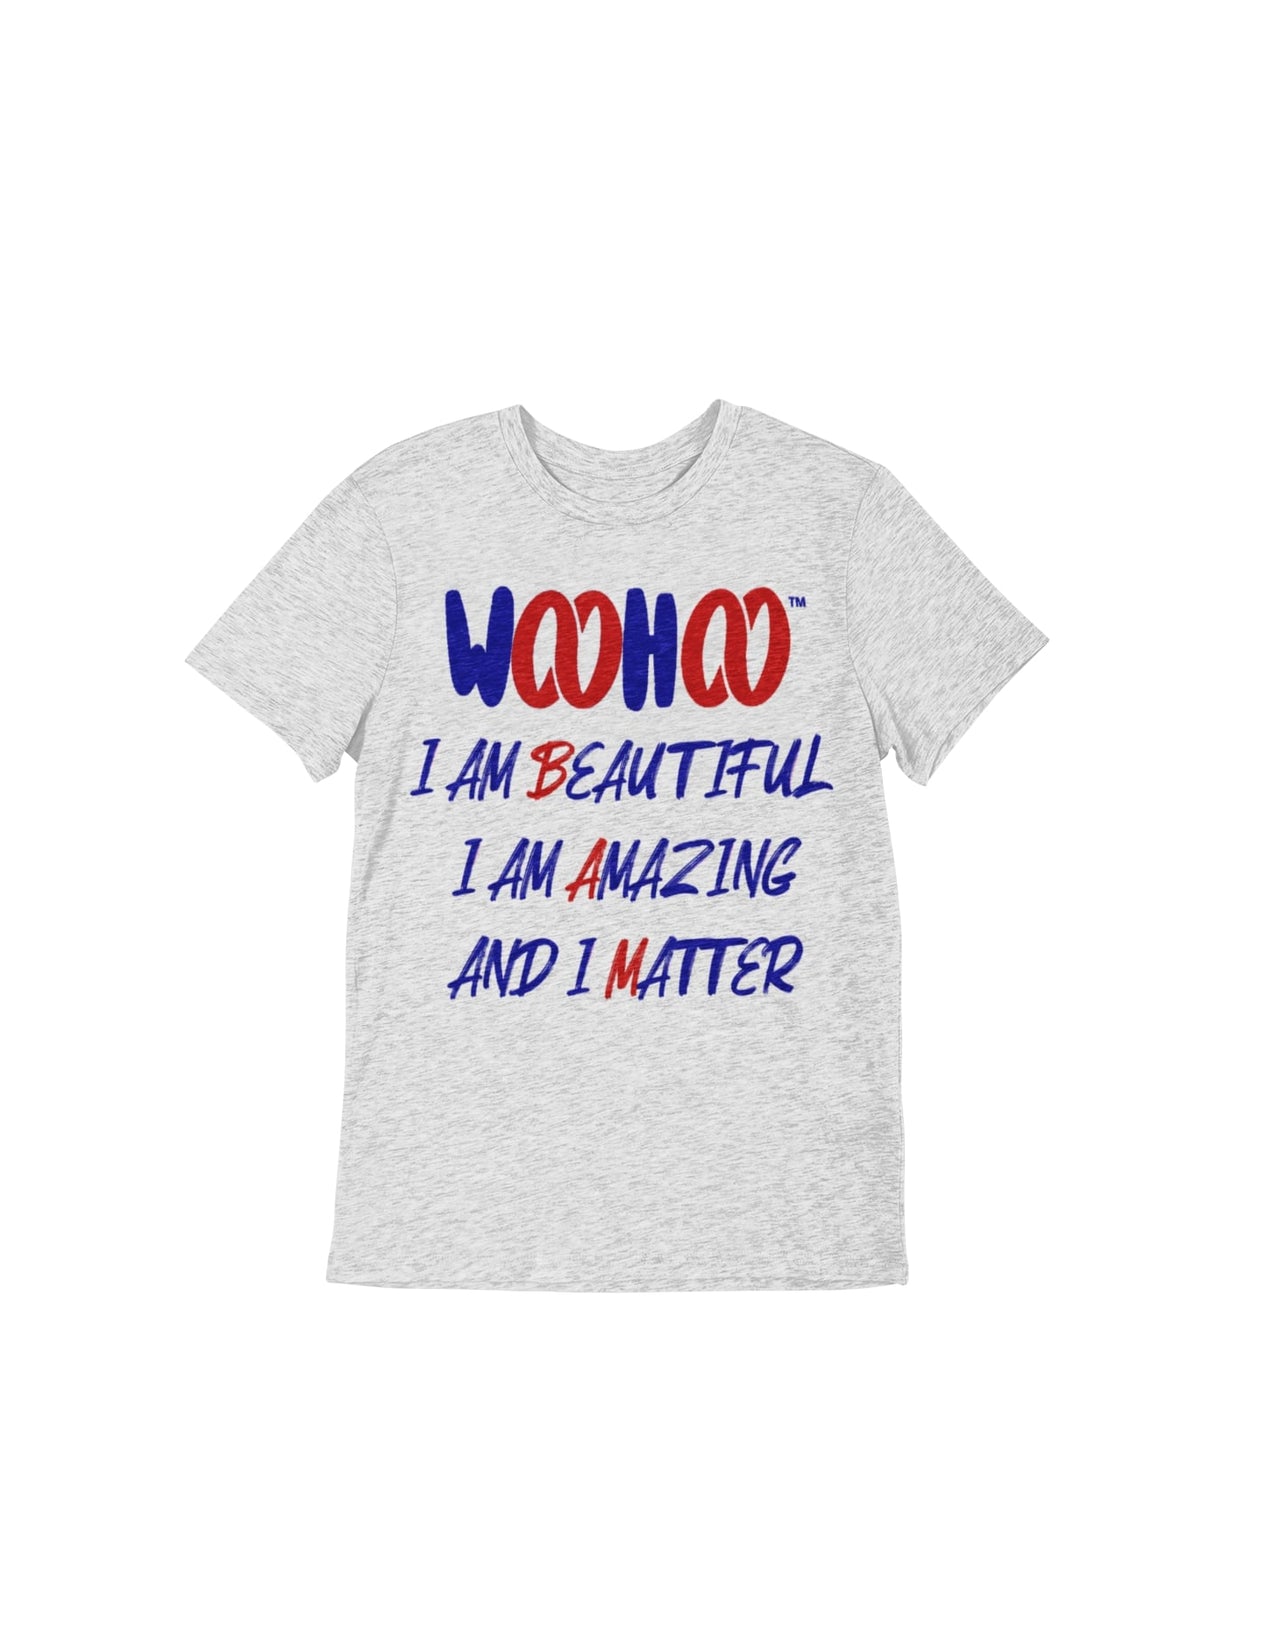 A heather gray unisex t-shirt designed by WooHoo Apparel.  The t-shirt features the text 'woohoo, I am Beautiful, amazing and I matter, BAM ' in cool-looking fonts, with the double 'oo' in 'woohoo' represented by a red double infinity symbol